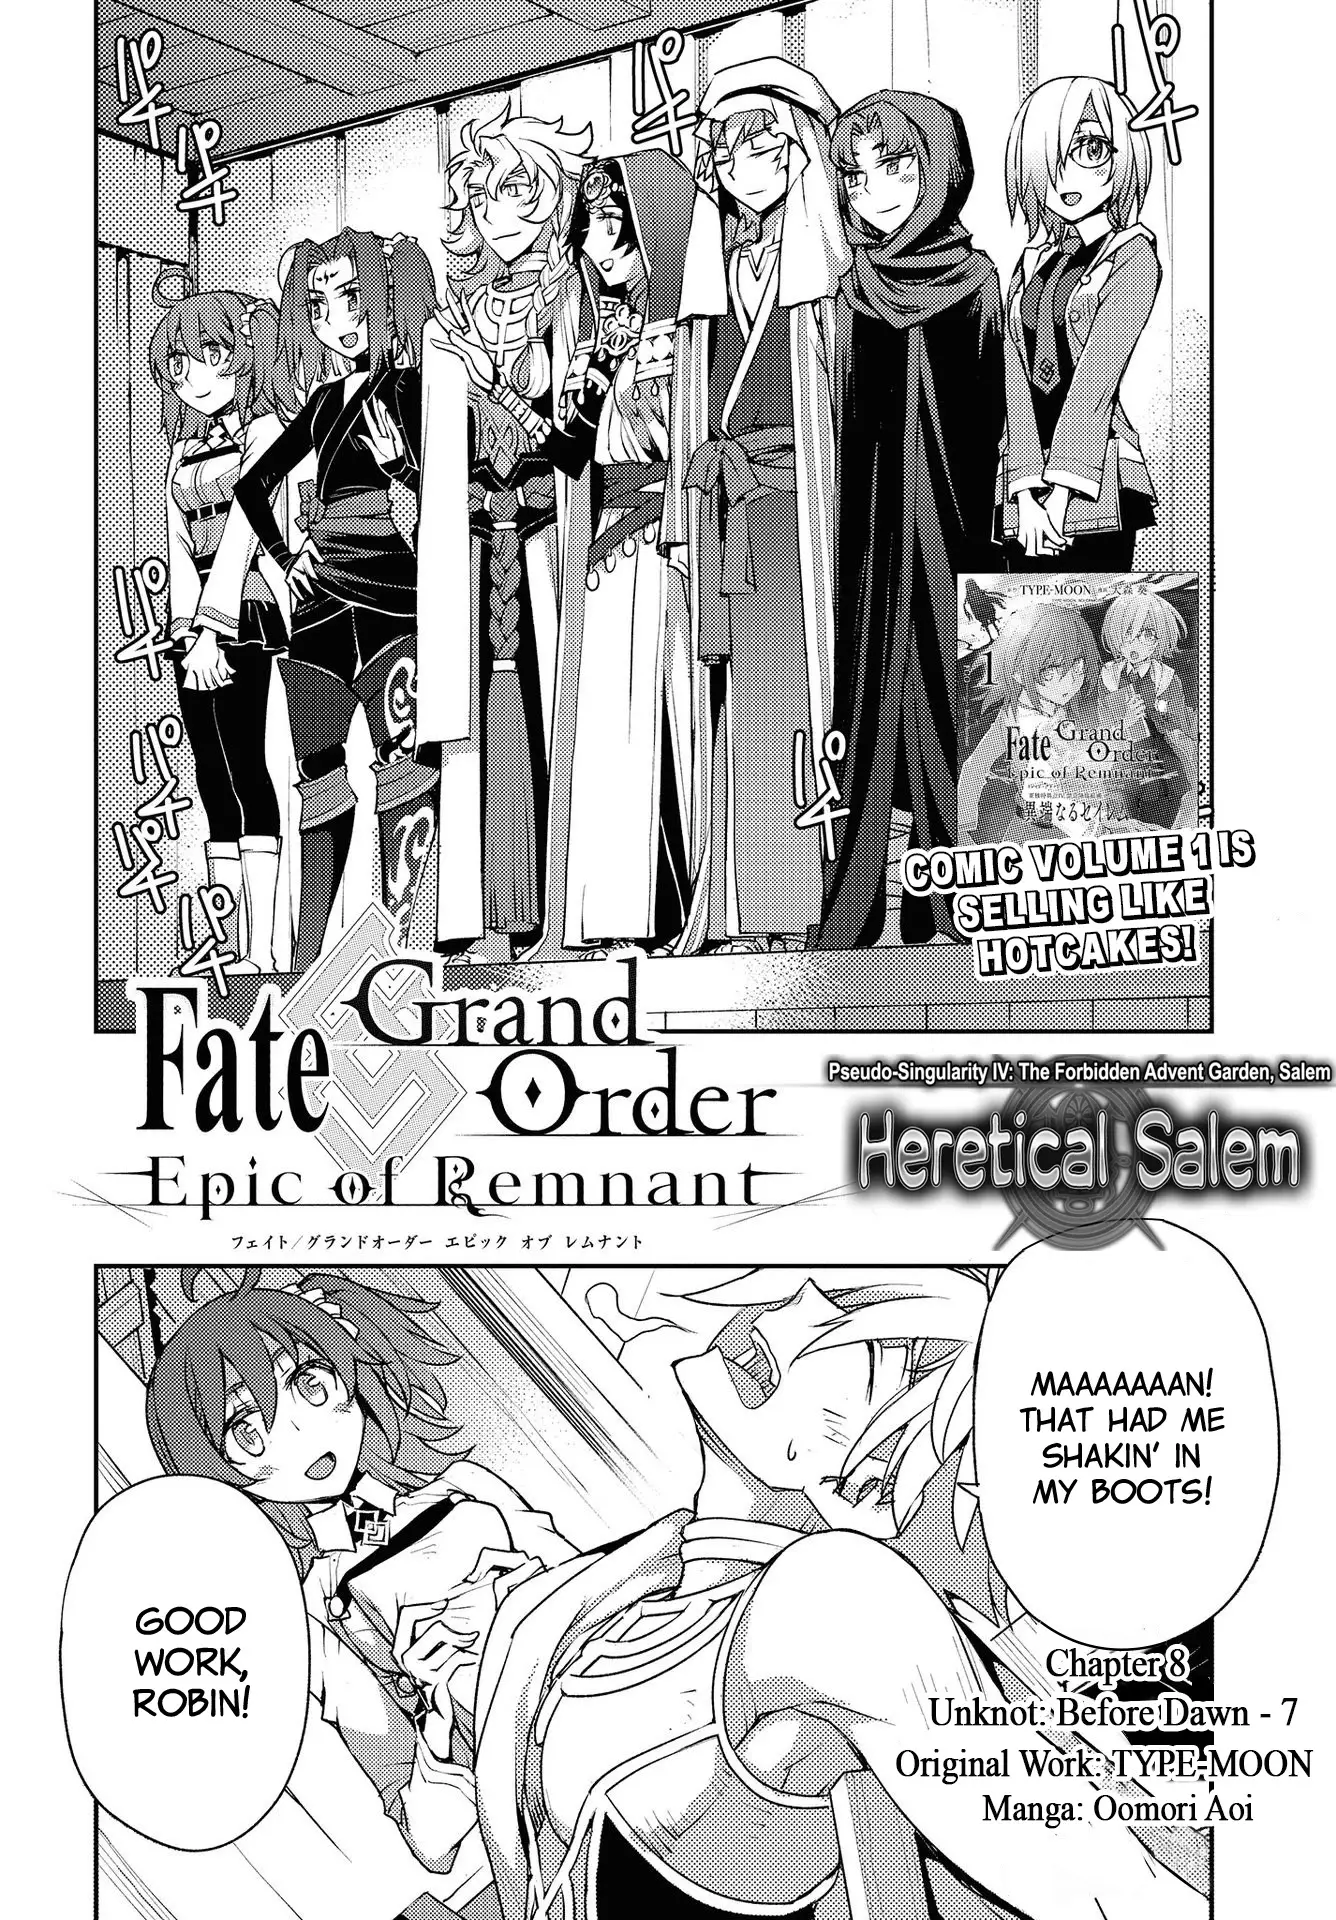 Fate/grand Order: Epic Of Remnant - Subspecies Singularity Iv: Taboo Advent Salem: Salem Of Heresy - 8 page 2